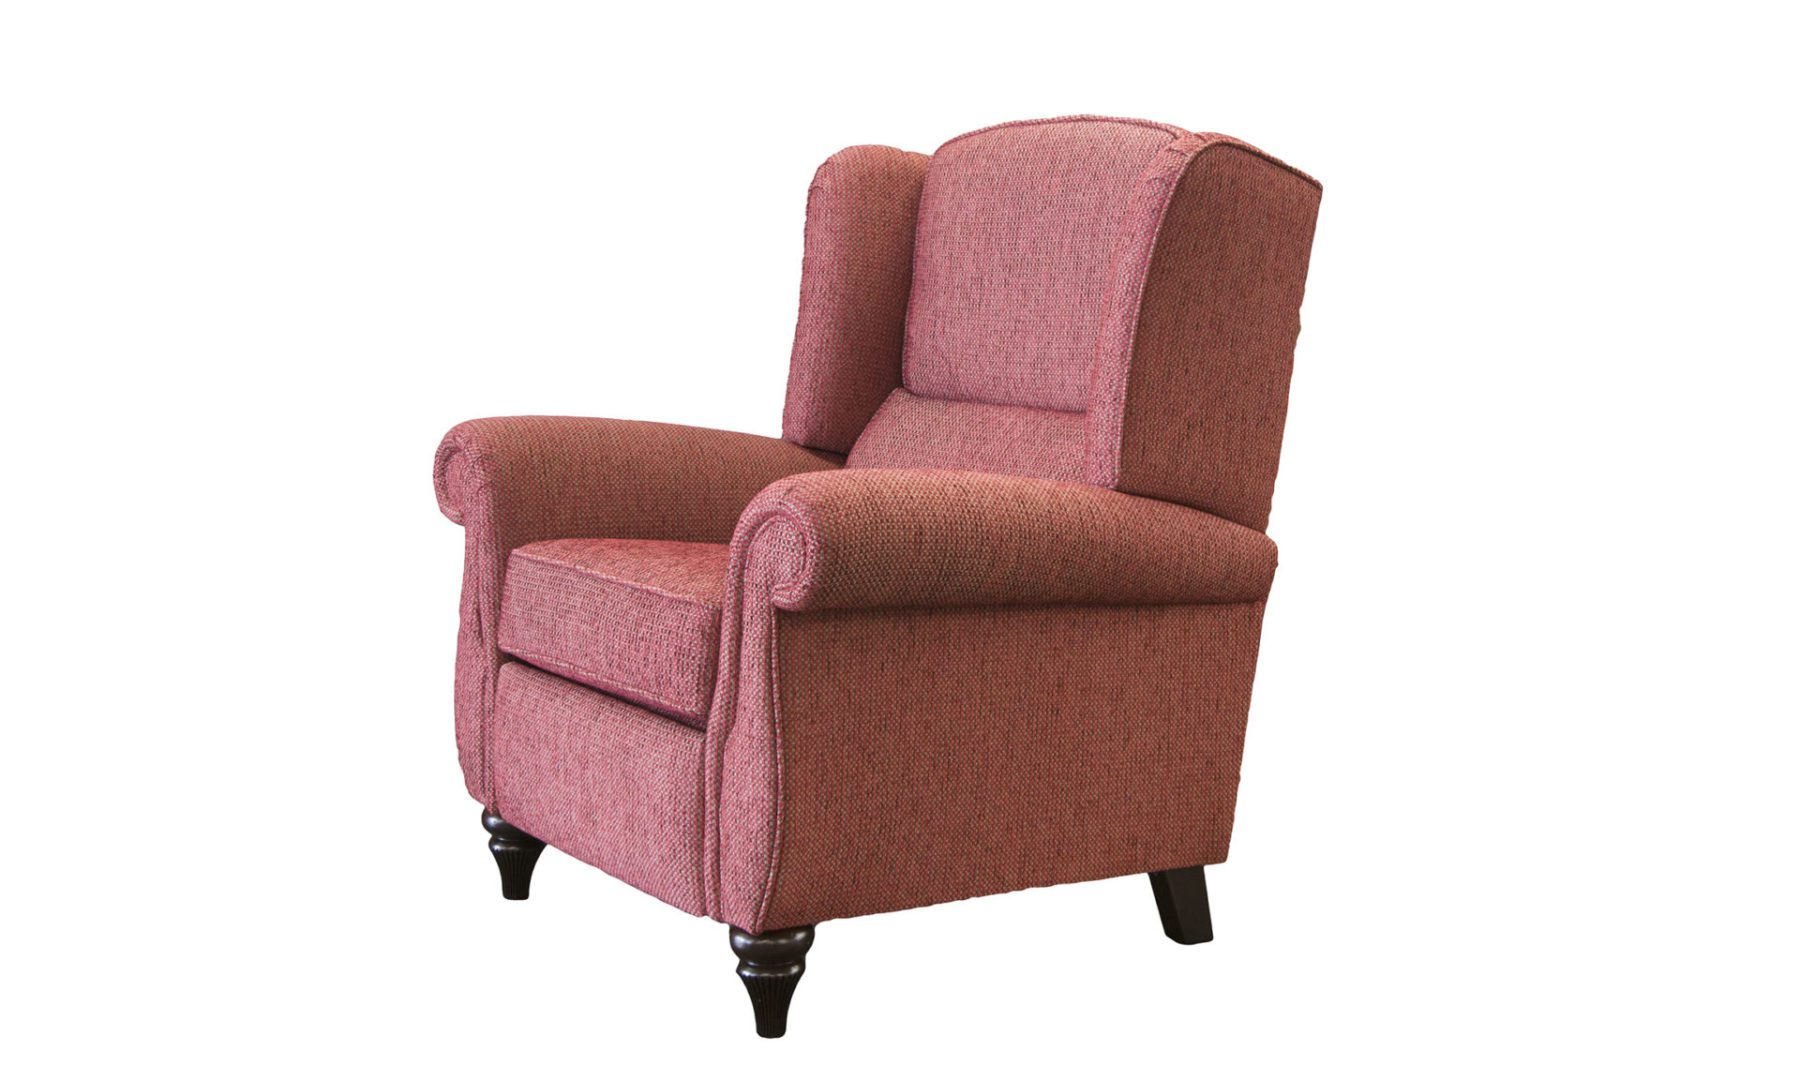 Greville Recliner Chair Discontinued Fabric - Fontington Tessuto 1551